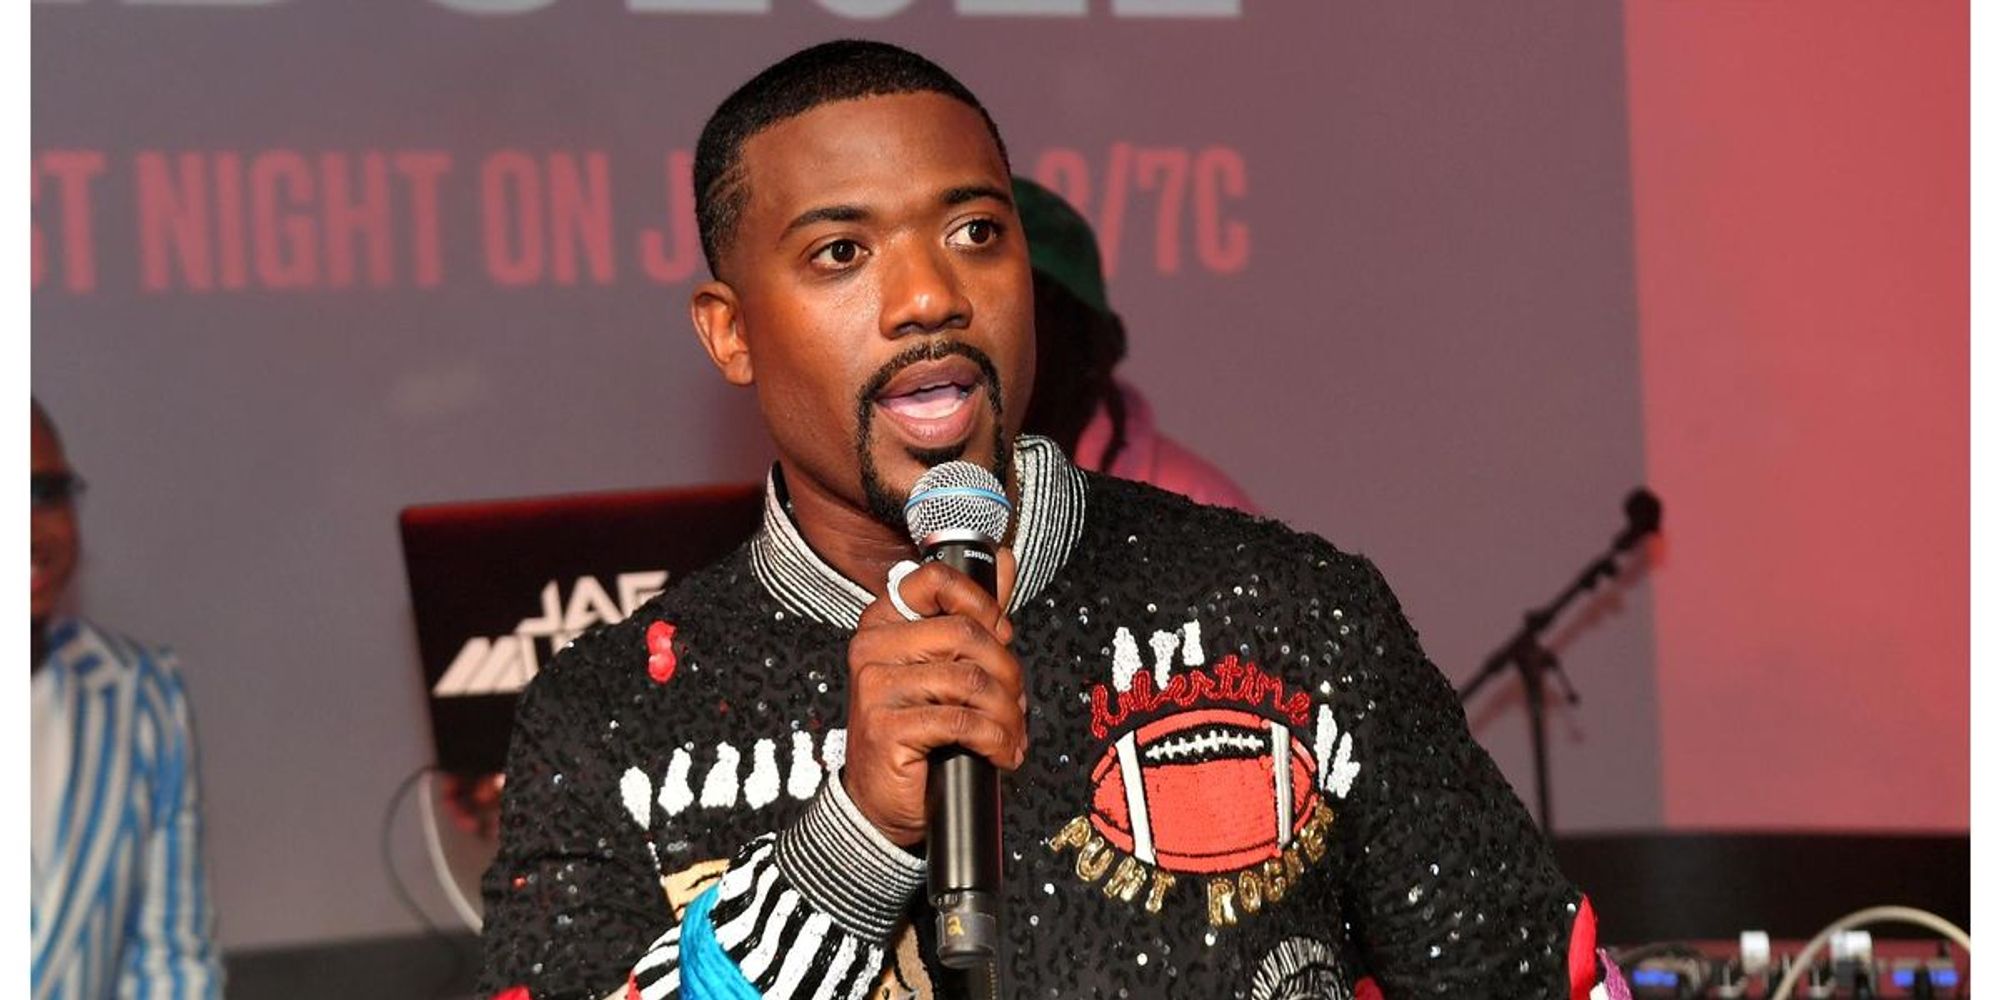 After being compared with Kim Kardashian’s new headphones, Ray J responded